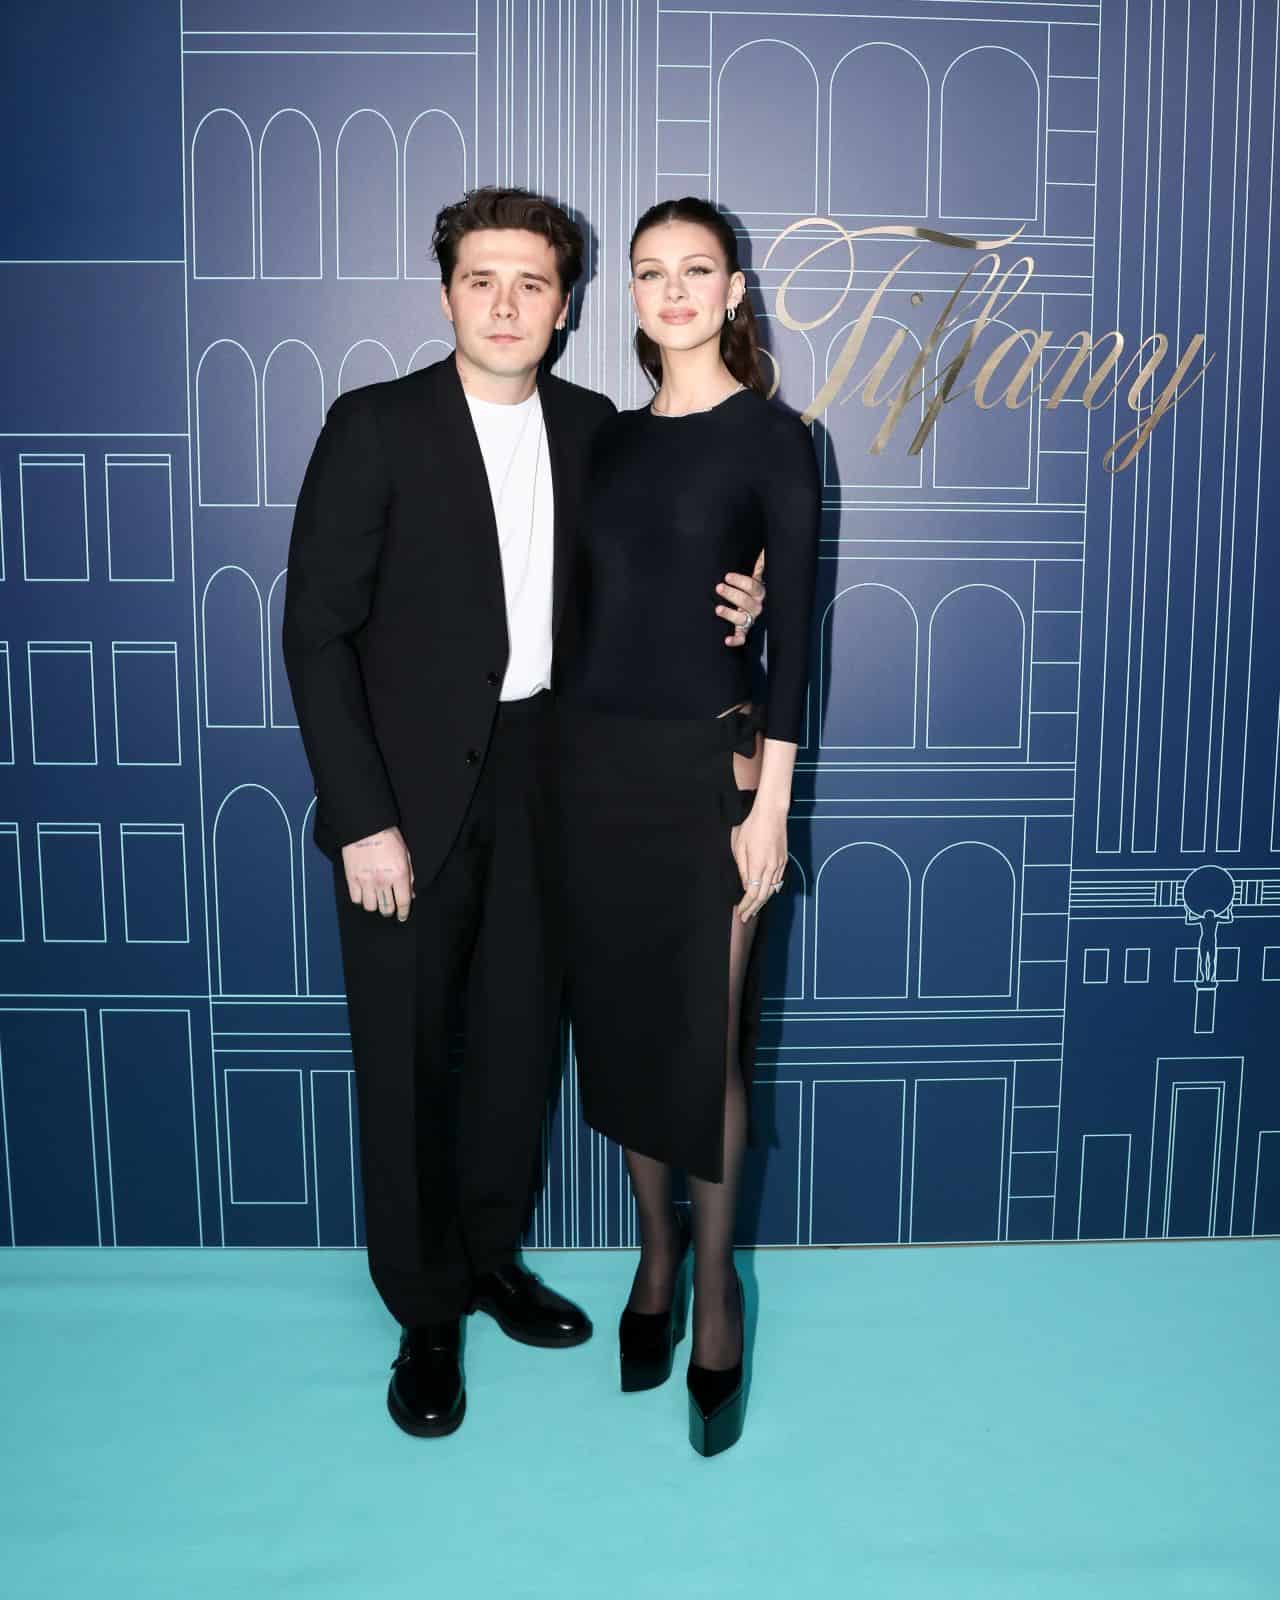 Nicola Peltz in Black Dress at Tiffany & Co.'s Flagship Store Re-Opening